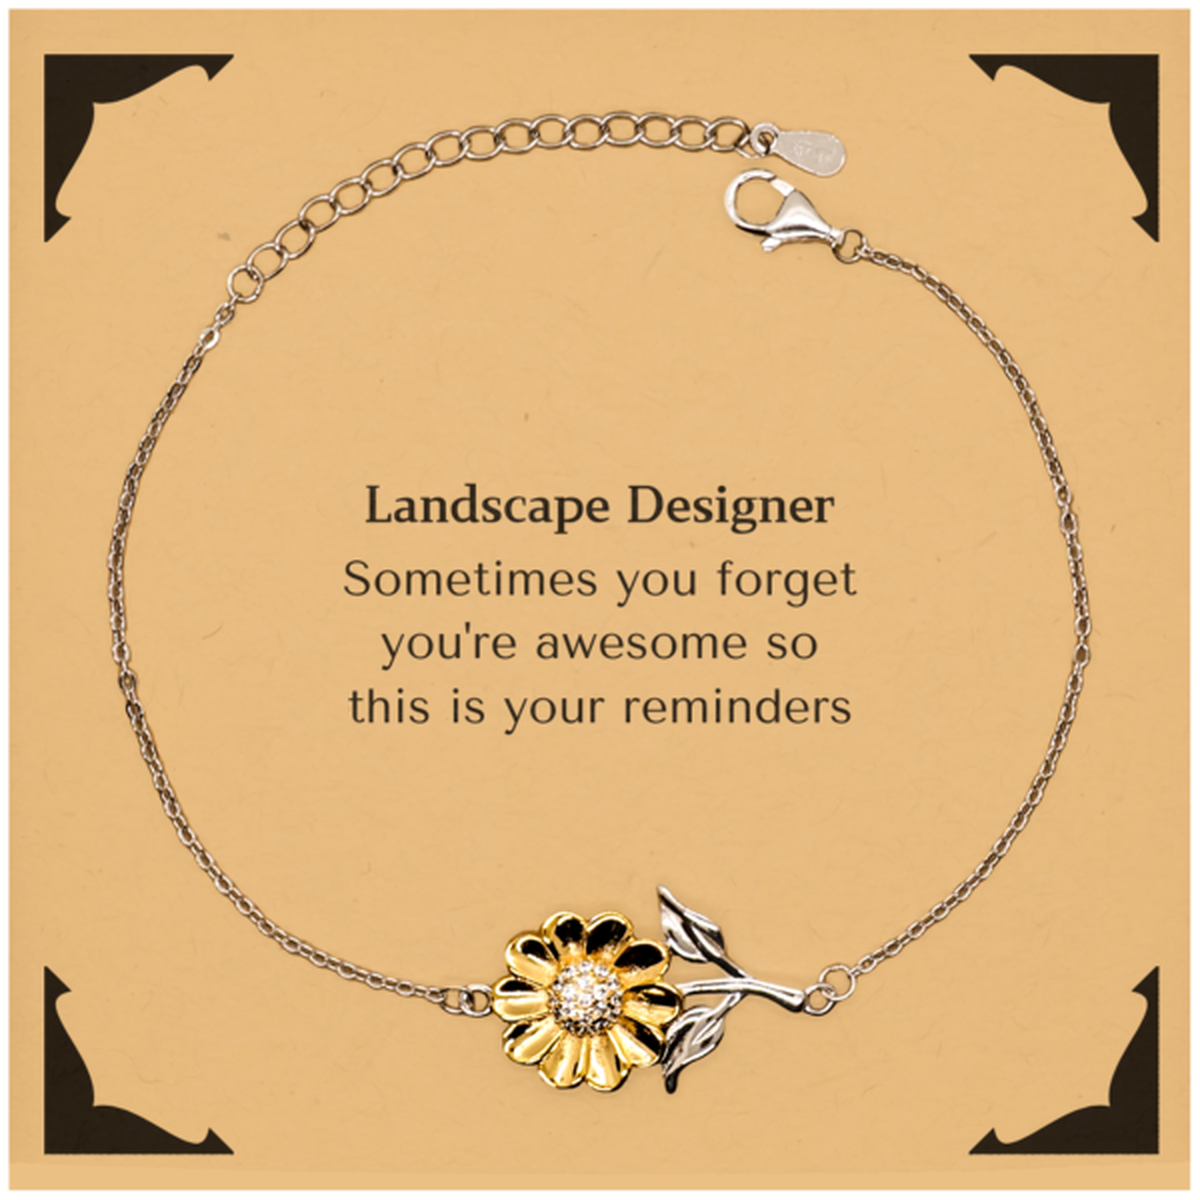 Sentimental Landscape Designer Sunflower Bracelet, Landscape Designer Sometimes you forget you're awesome so this is your reminders, Graduation Christmas Birthday Gifts for Landscape Designer, Men, Women, Coworkers